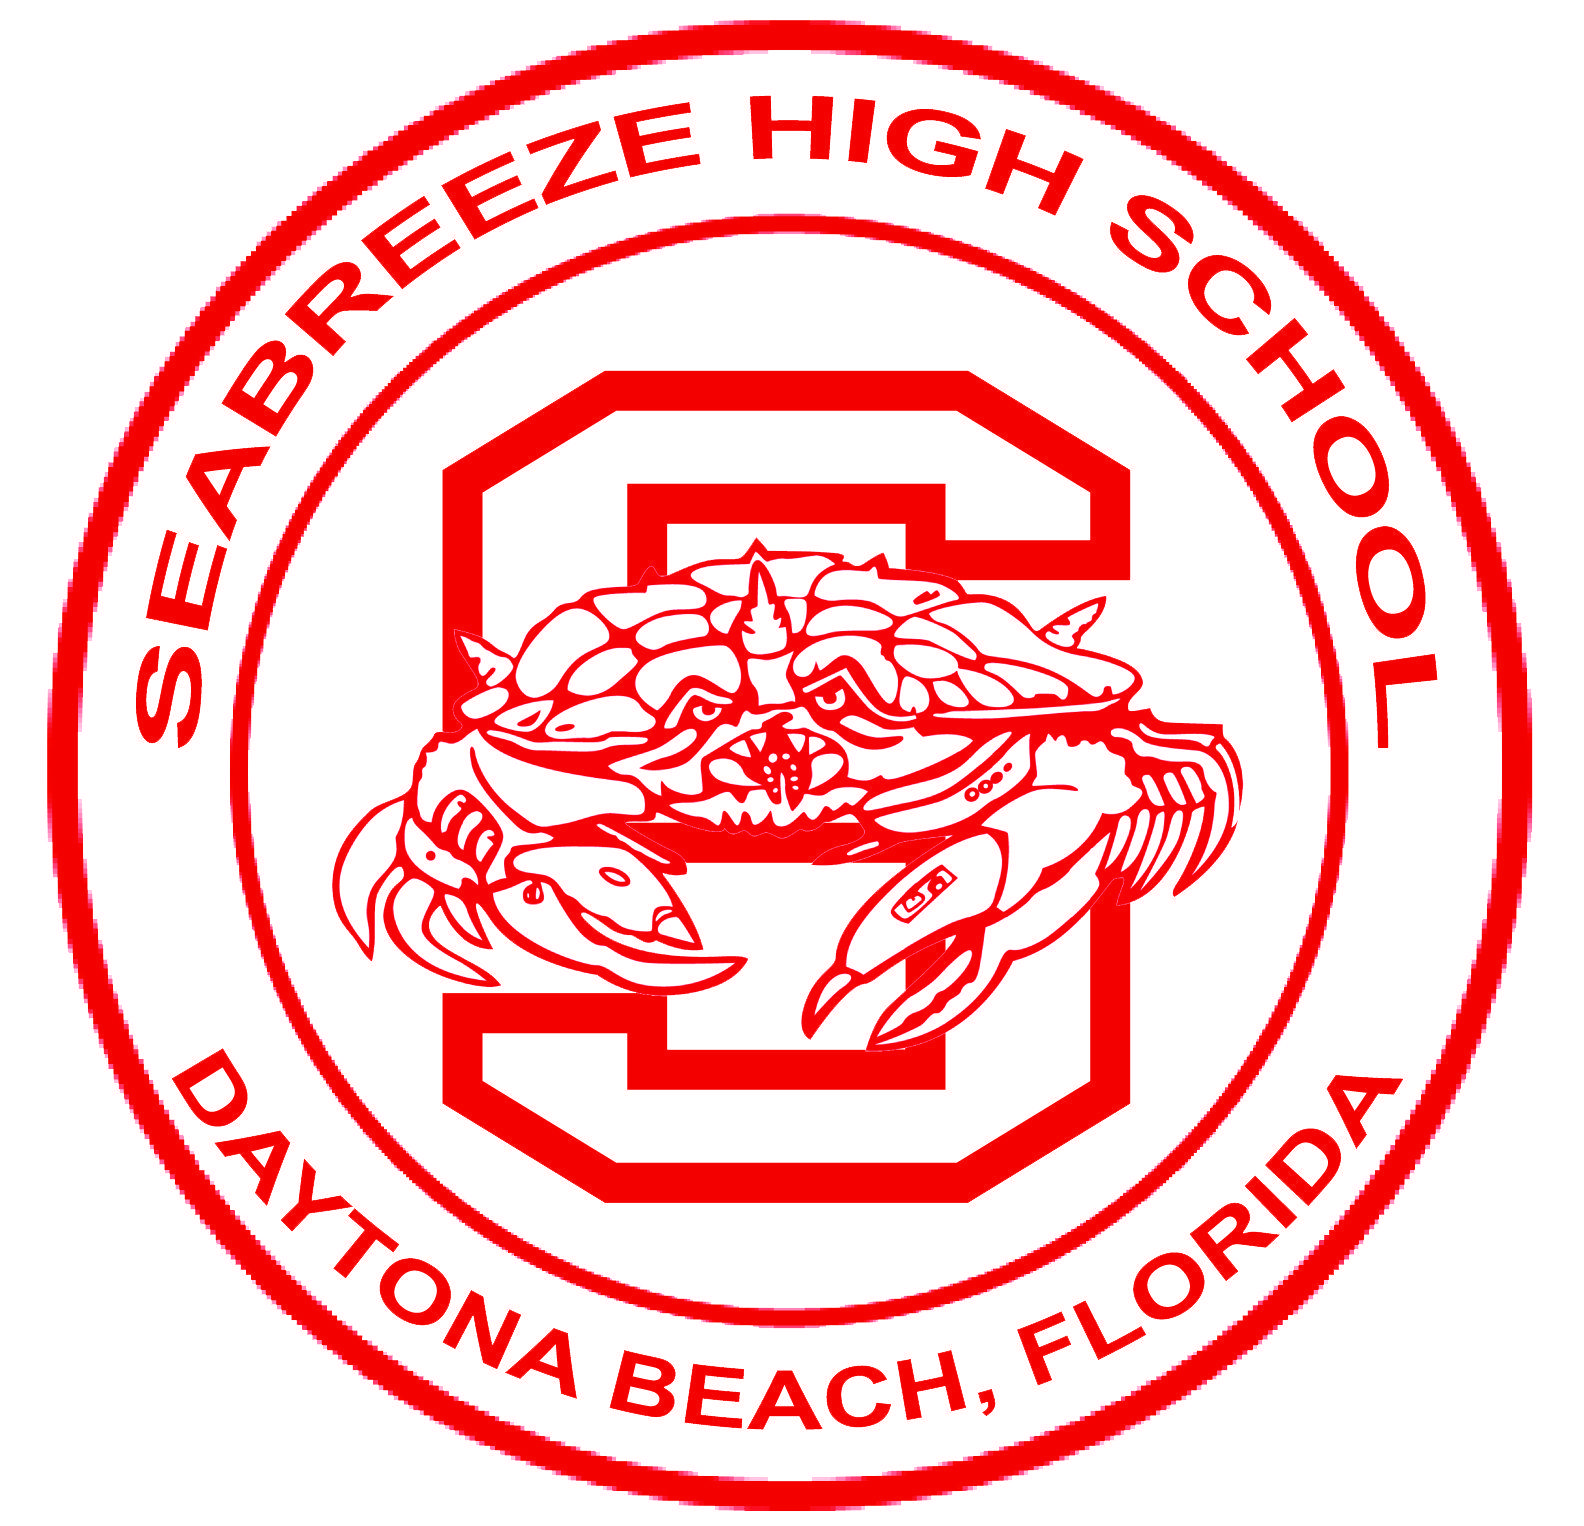 Looks Like in a Red Circle Logo - Sandcrab logos High School